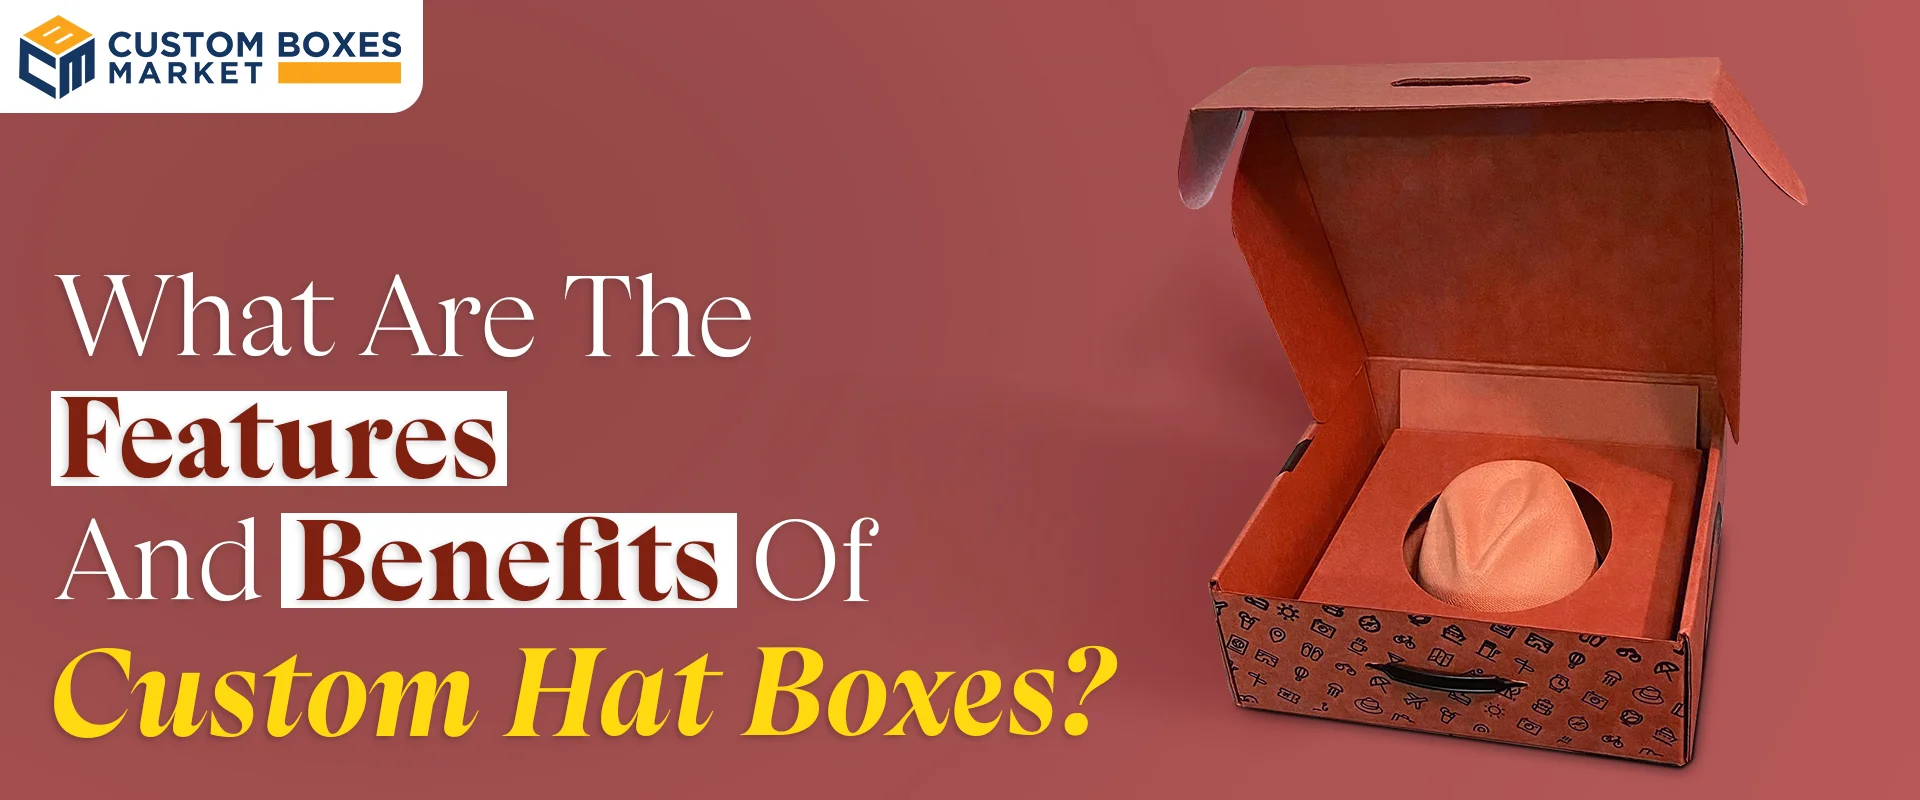 What Are The Features And Benefits Of Custom Hat Boxes?